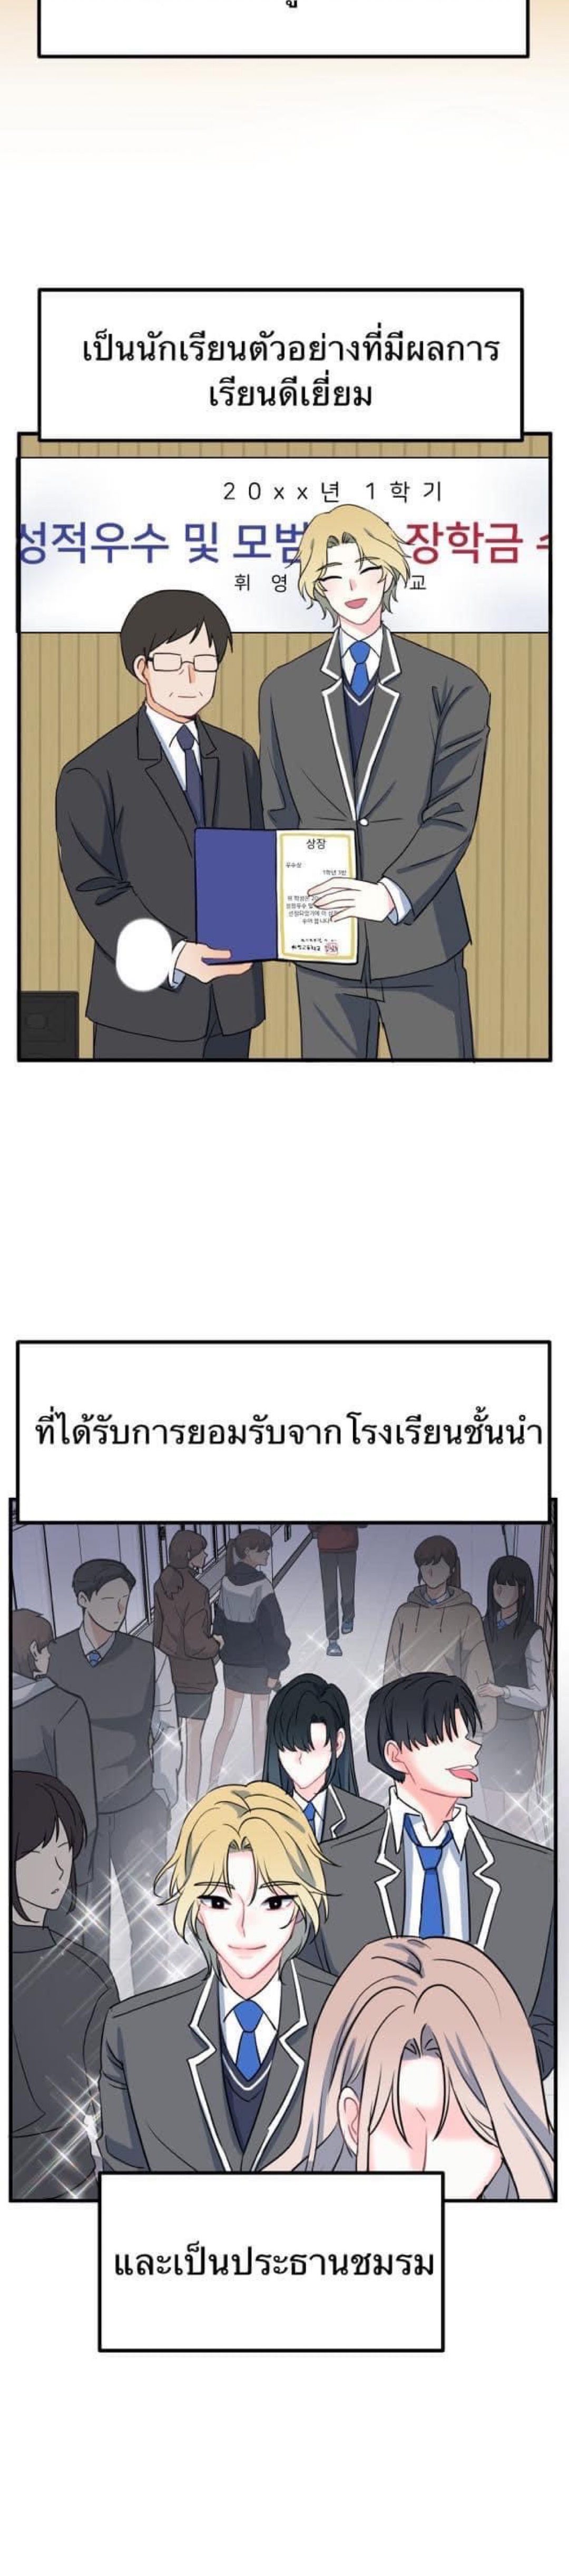 Mary’s Burning Circuit of Happiness ตอนที่ 1